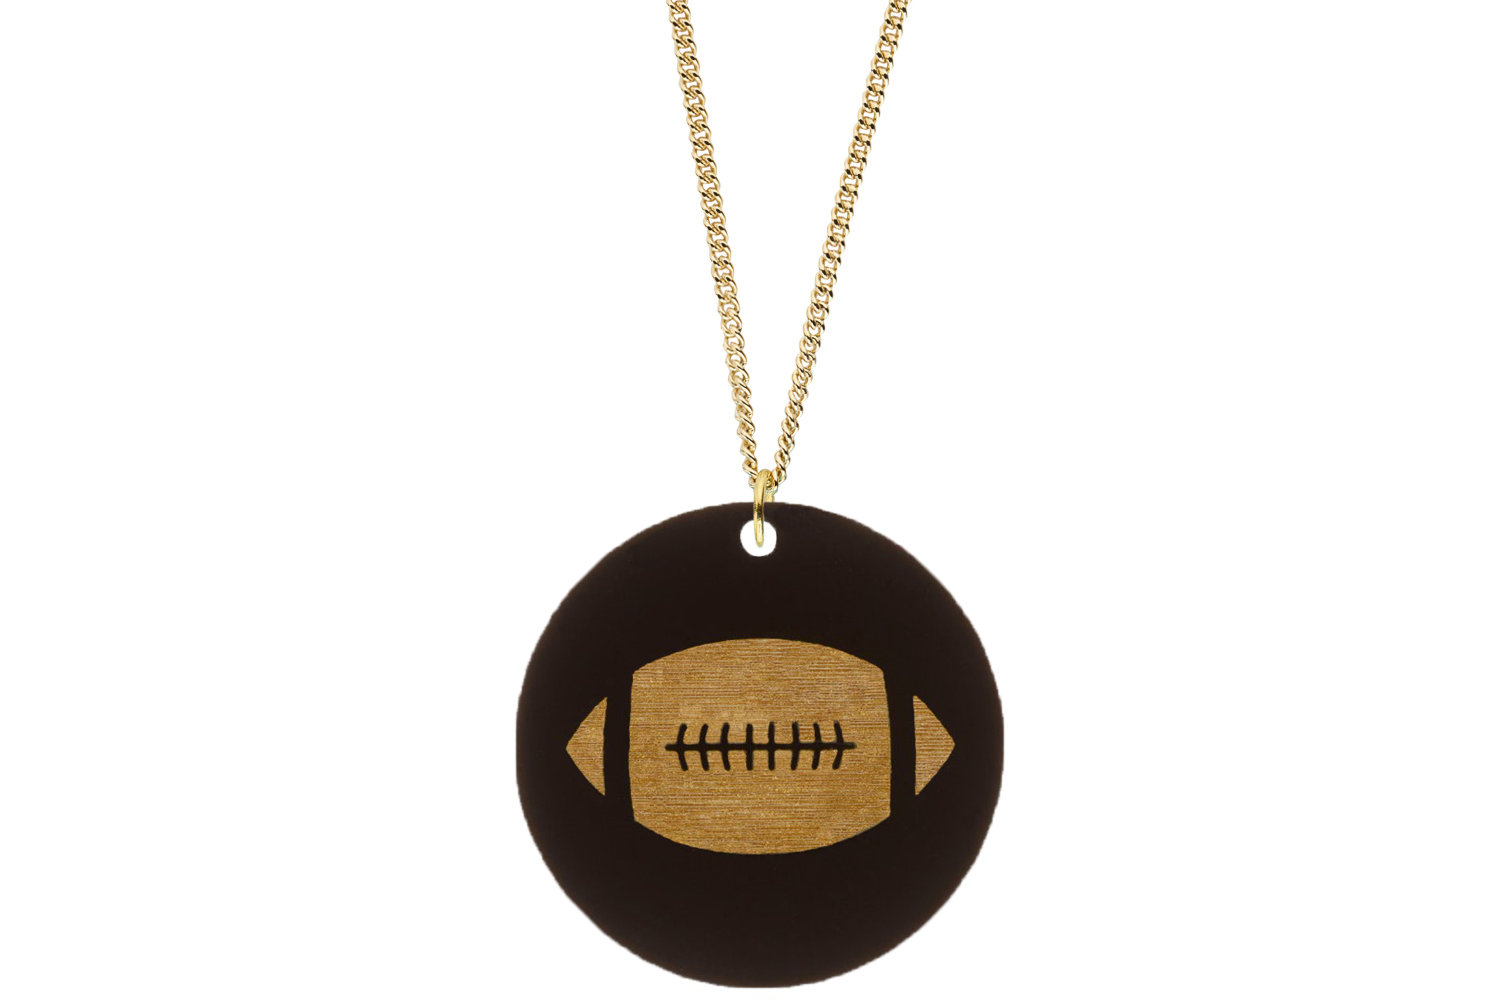 Football Pendant Subtle Style Refined with Paint on Chain Necklace